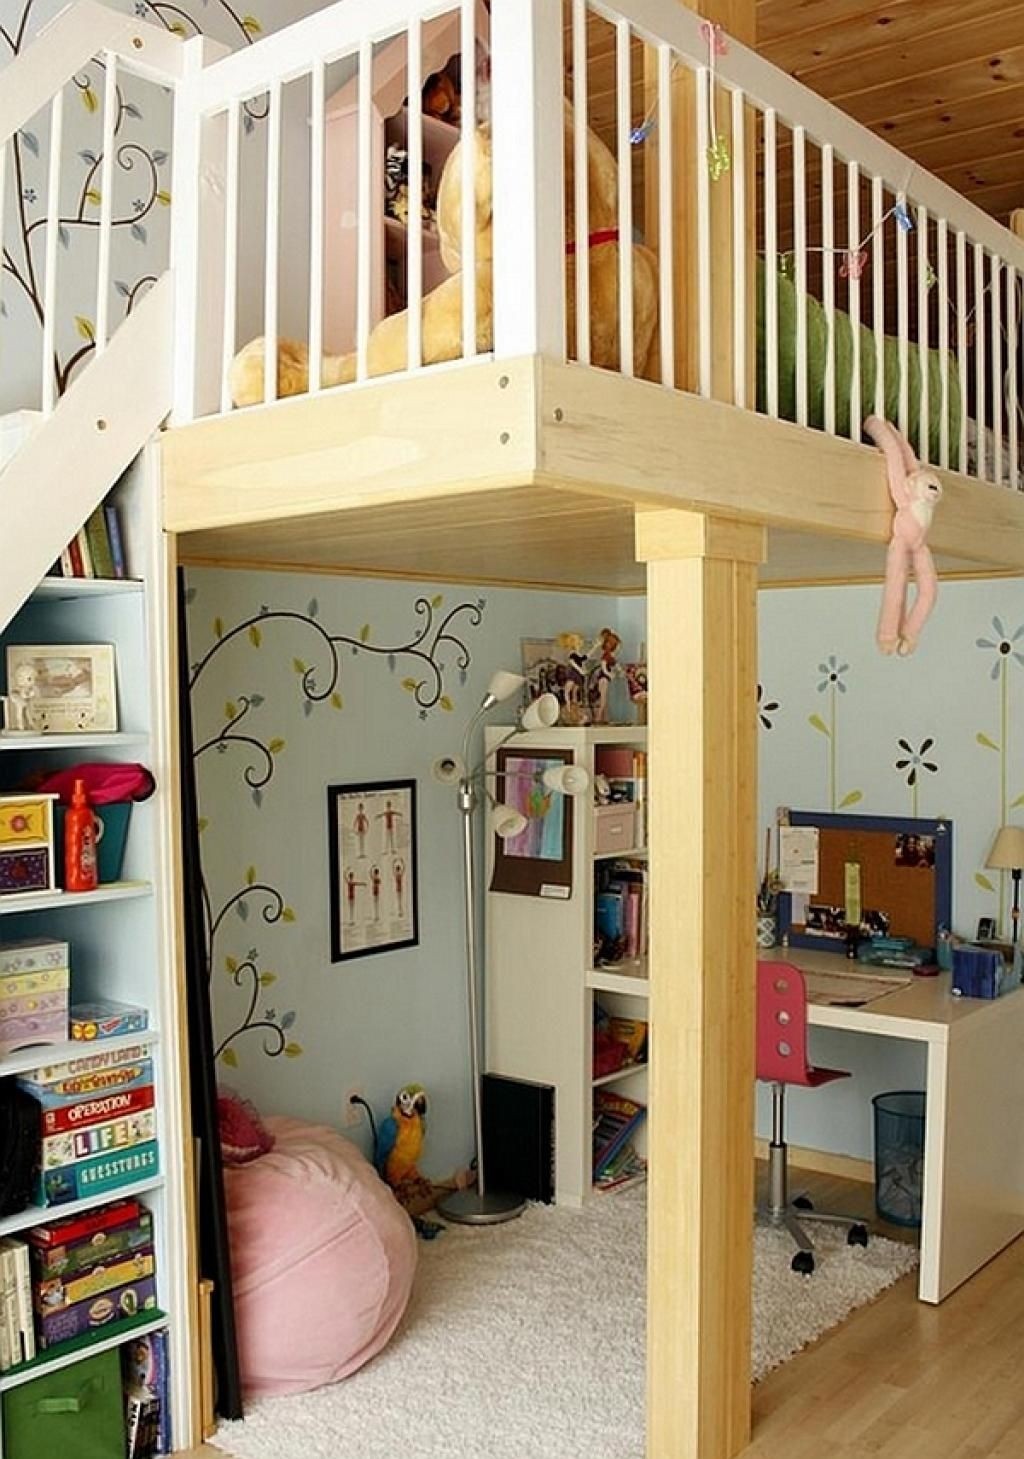 Loft bed with table